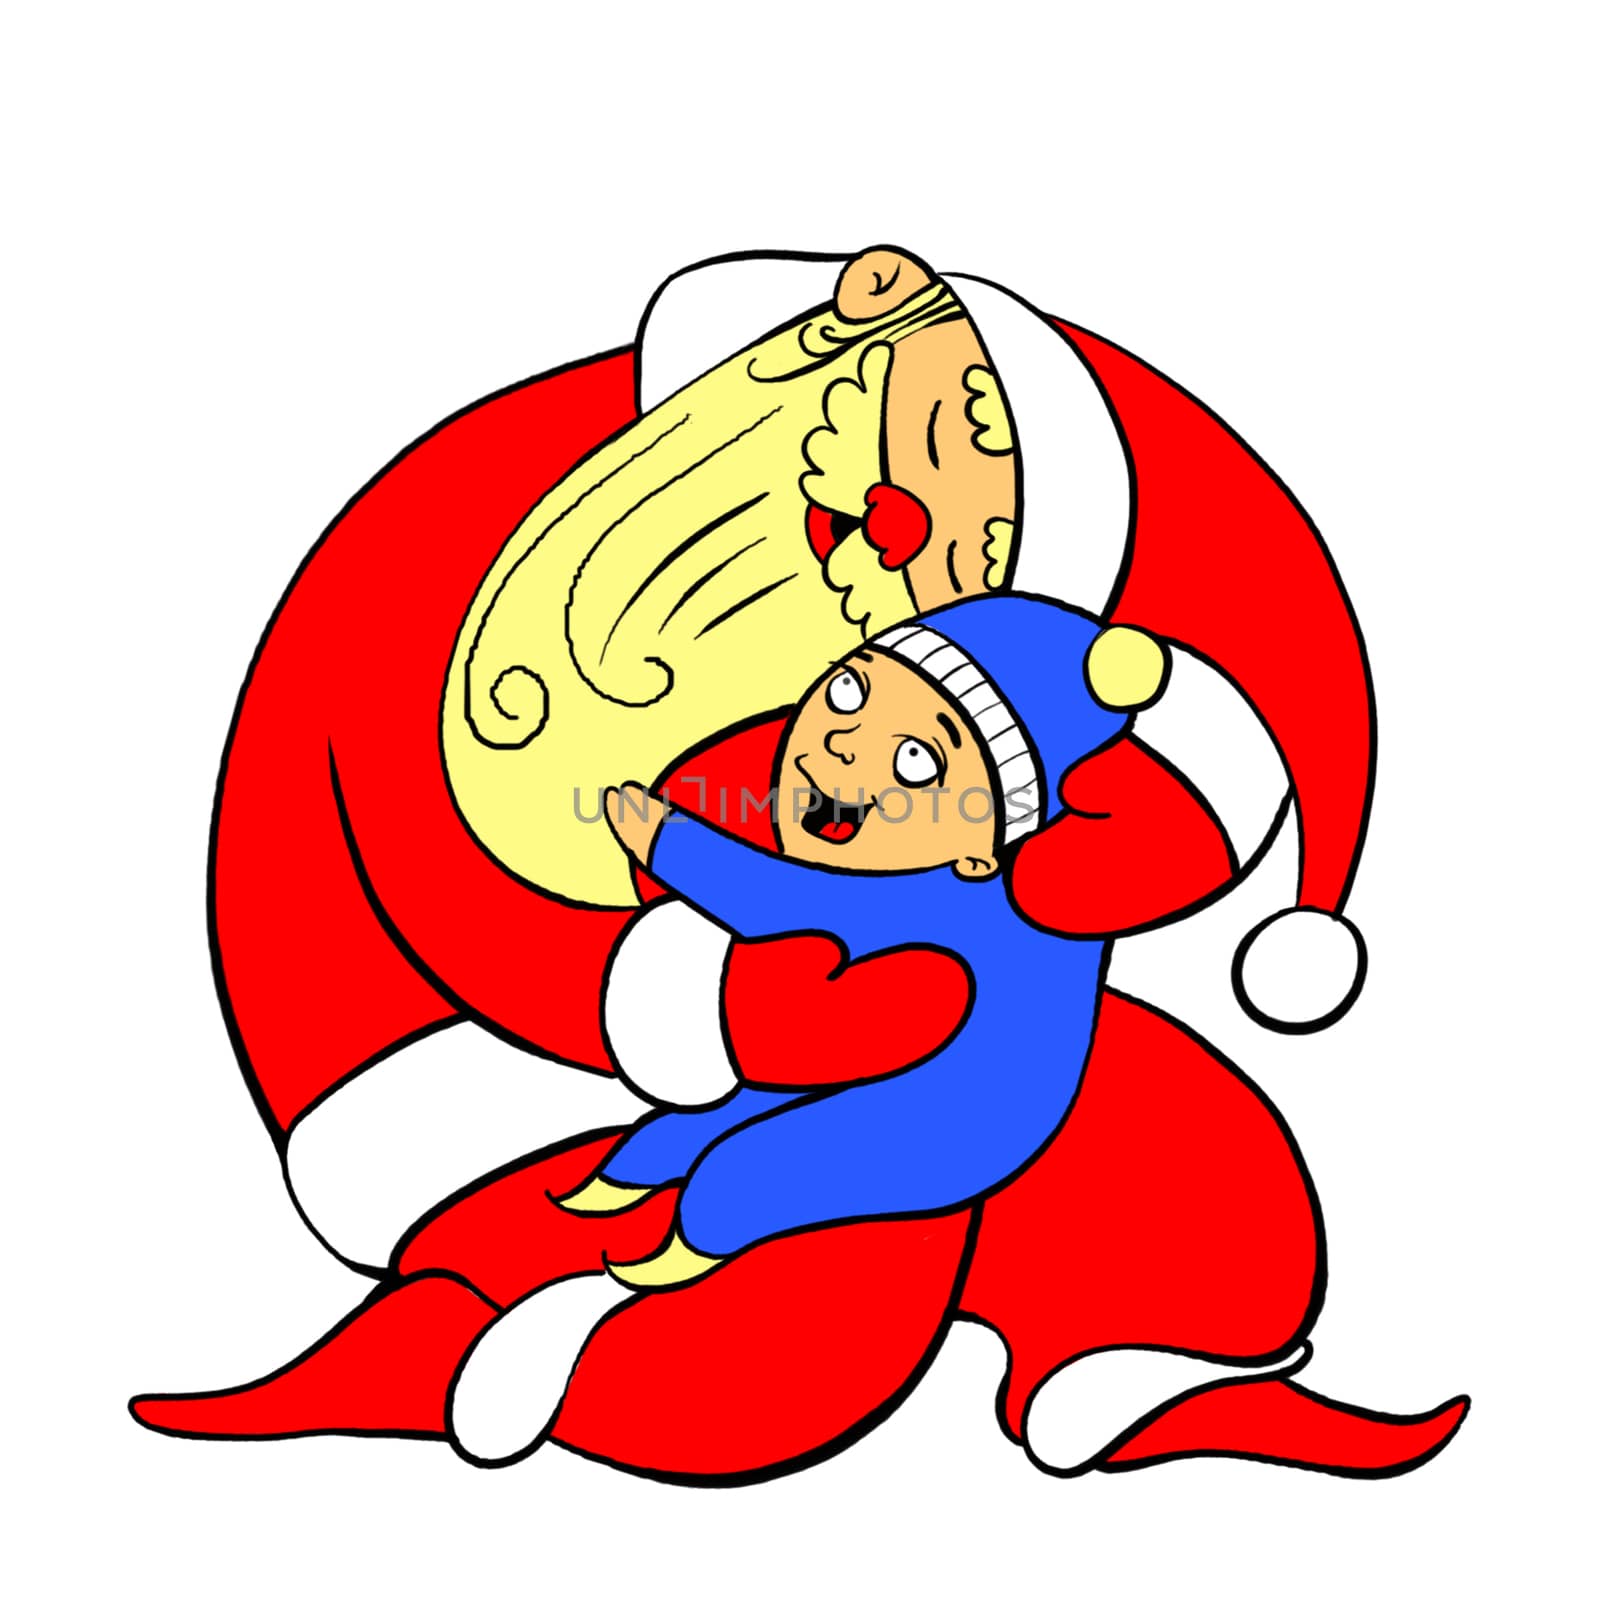 Santa Claus gently holds on his hands and hugs a joyful child by heliburcka